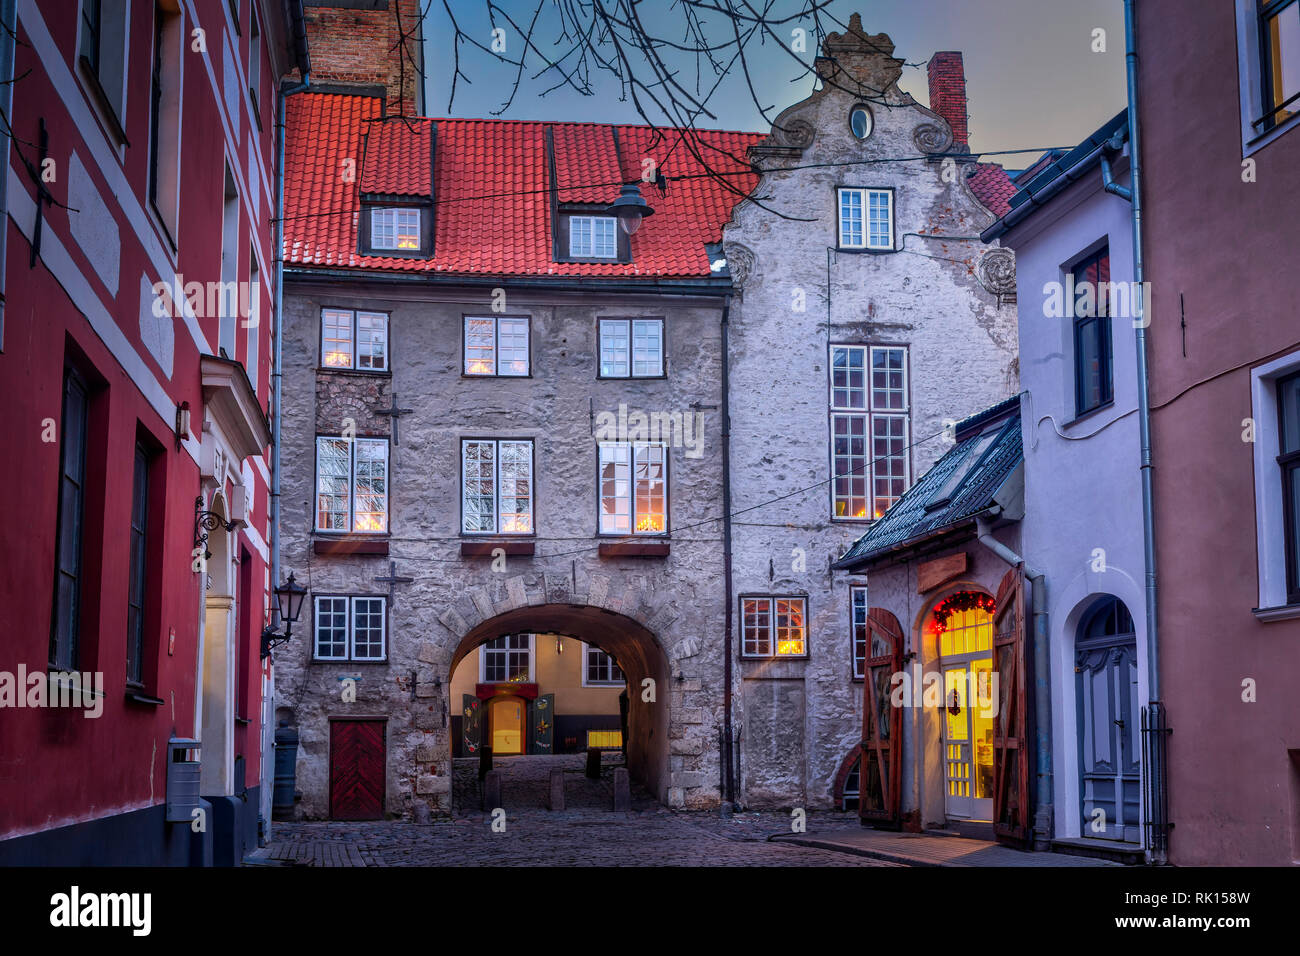 Medieval motifs in old Riga city. For tourists, medieval architecture of old Riga town can offer unforgettable atmosphere of the Middle Ages and uniqu Stock Photo